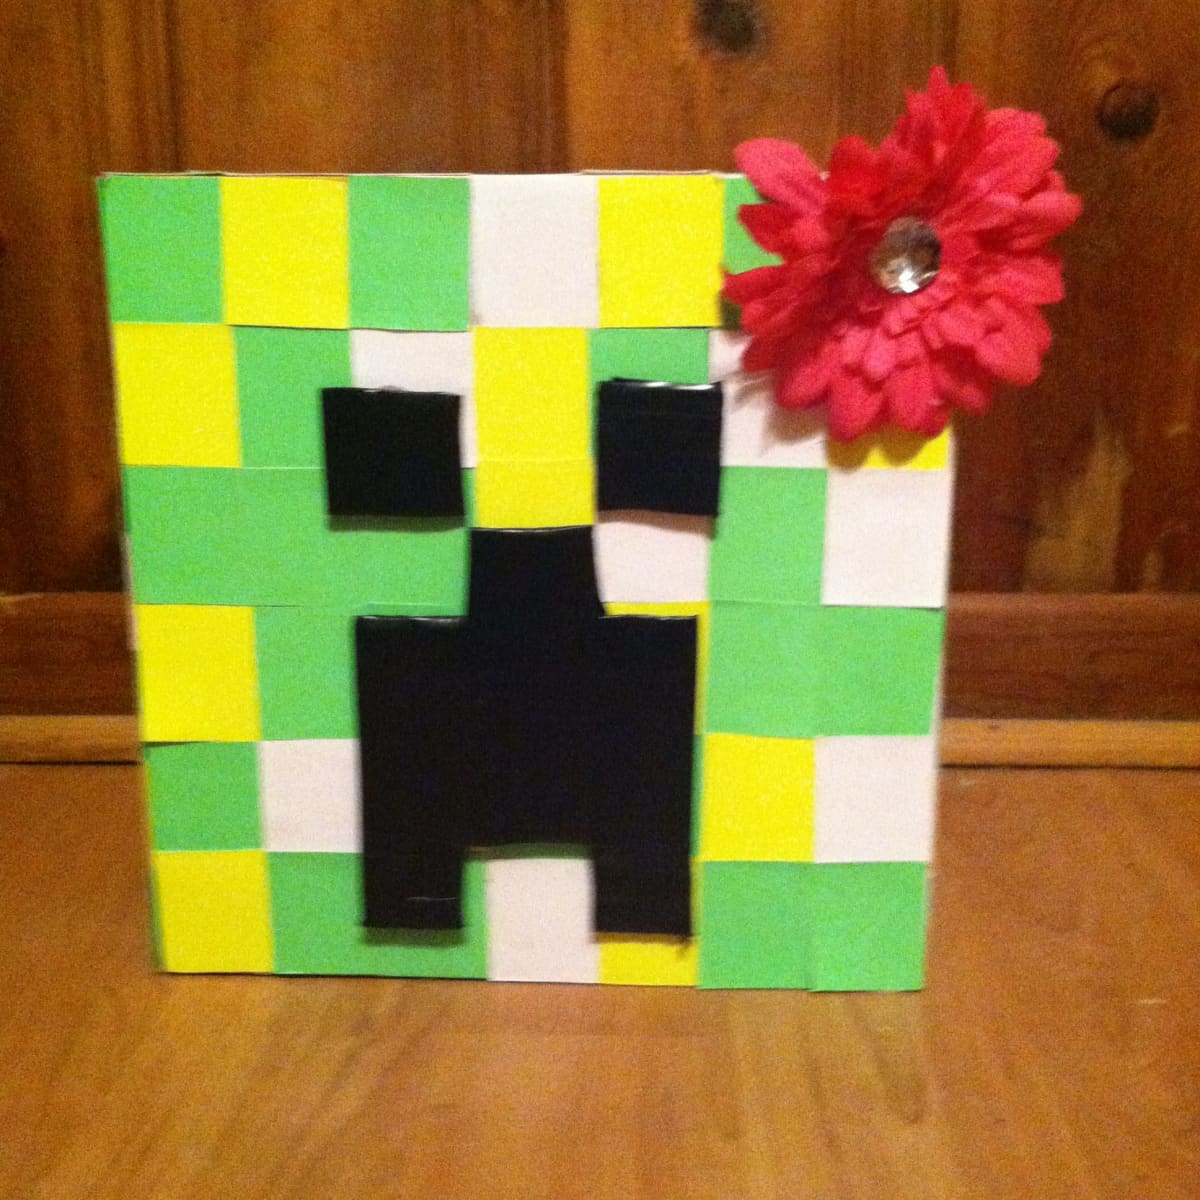 How To Make A Papercraft Creeper From Minecraft - Art For Kids Hub 